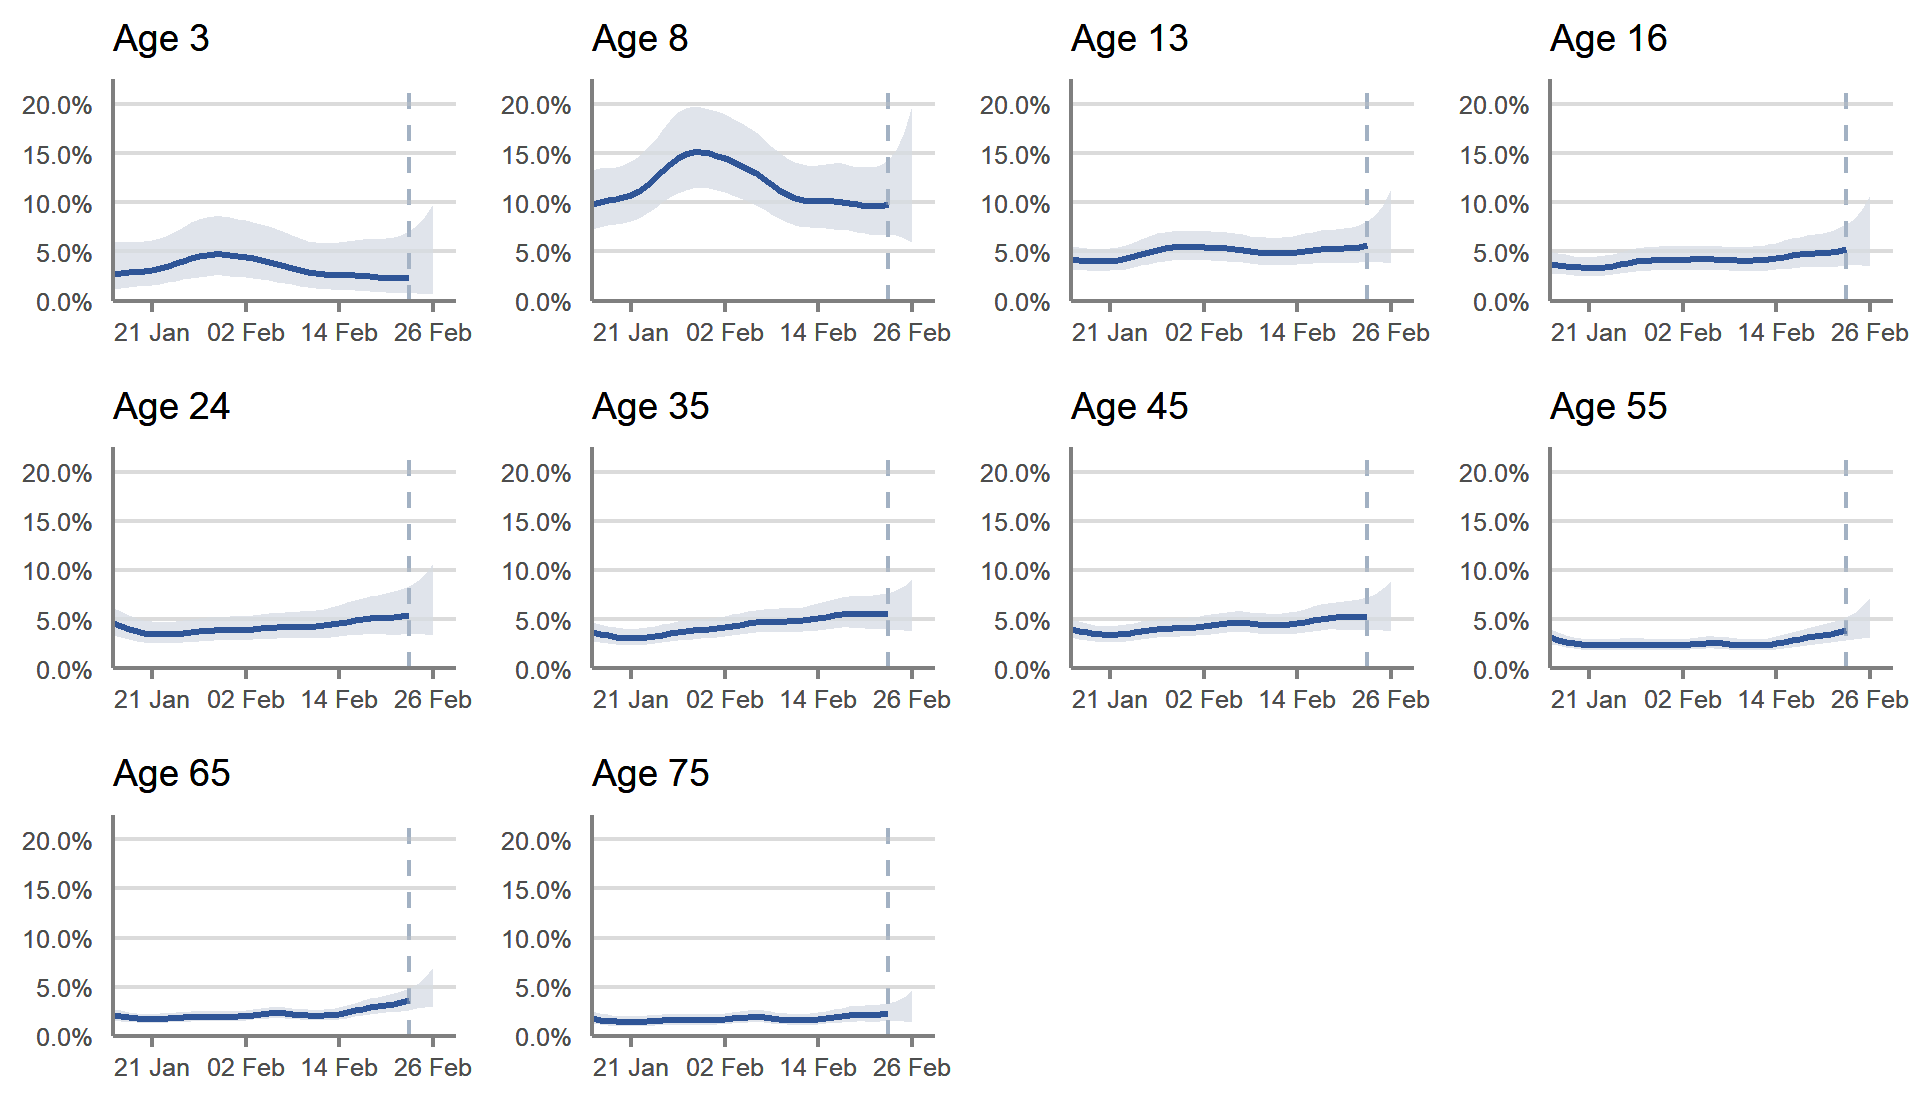 In Scotland, there are early signs of an increase in the percentage of the population testing positive for COVID-19 in those around age 30 and those around age 60. The trend is uncertain for children and younger adults due to wide confidence intervals